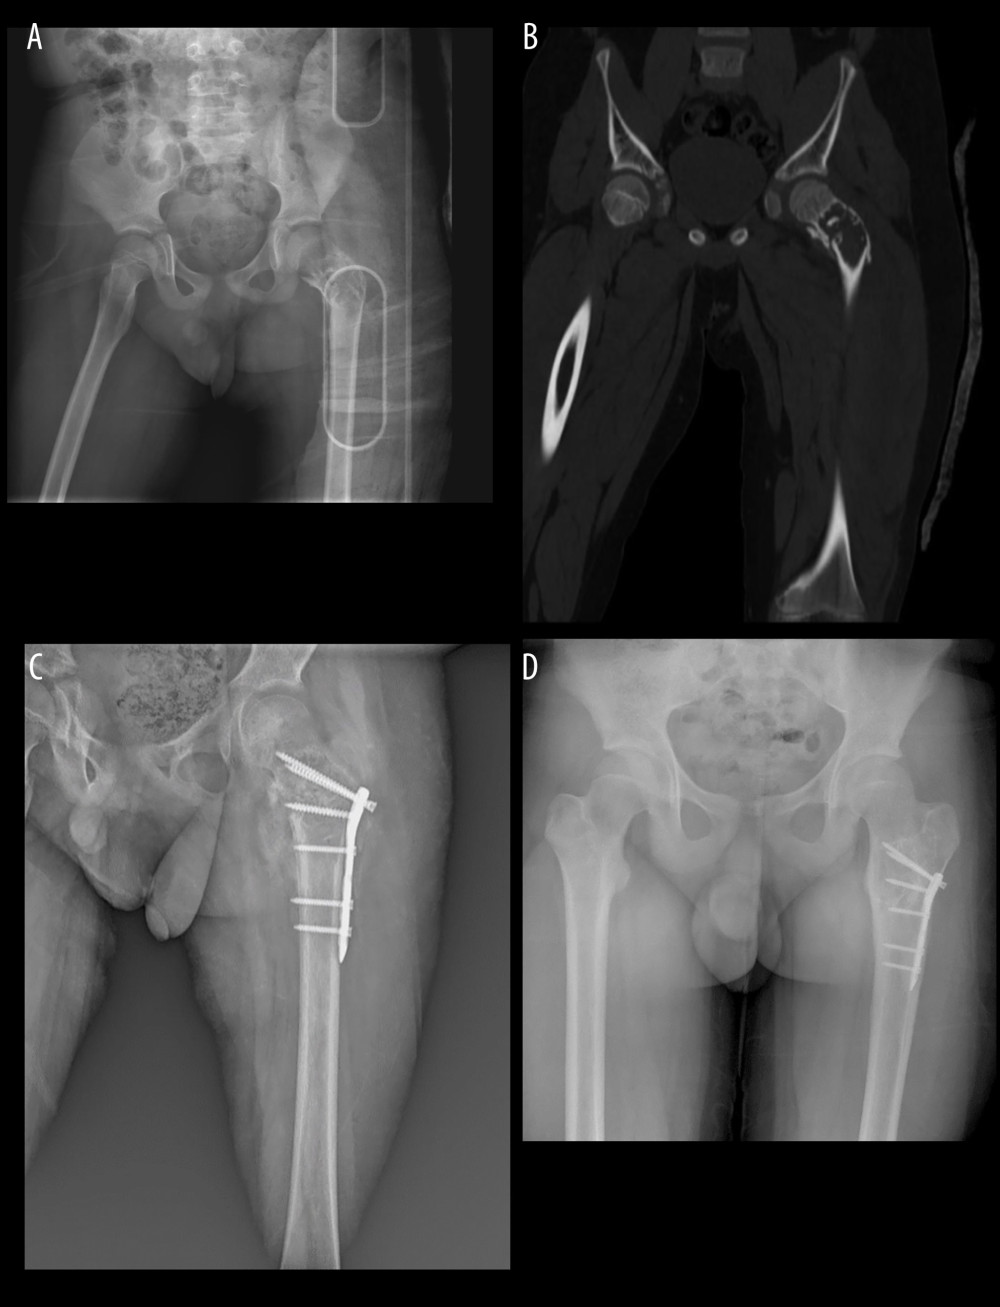 (A) Preoperative X-ray of an 8-year-old boy (Case 1). (B) Preoperative CT of Case 1. (C) Early postoperative X-Ray of Case 1. (D) Postoperative 8. year X-ray Case 1.